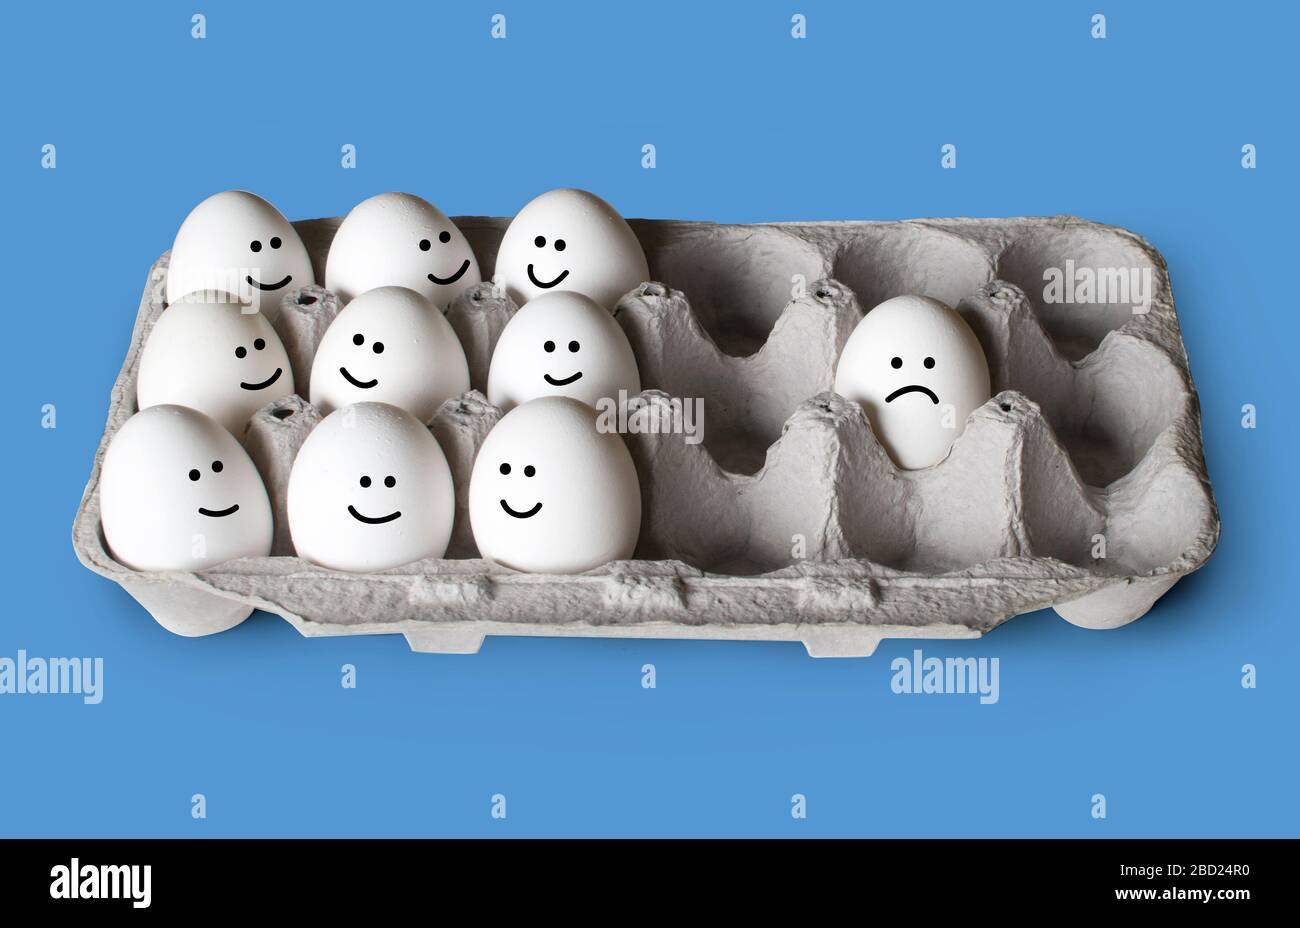 White eggs in a carton, one separated from the crowd, social distancing concept Stock Photo